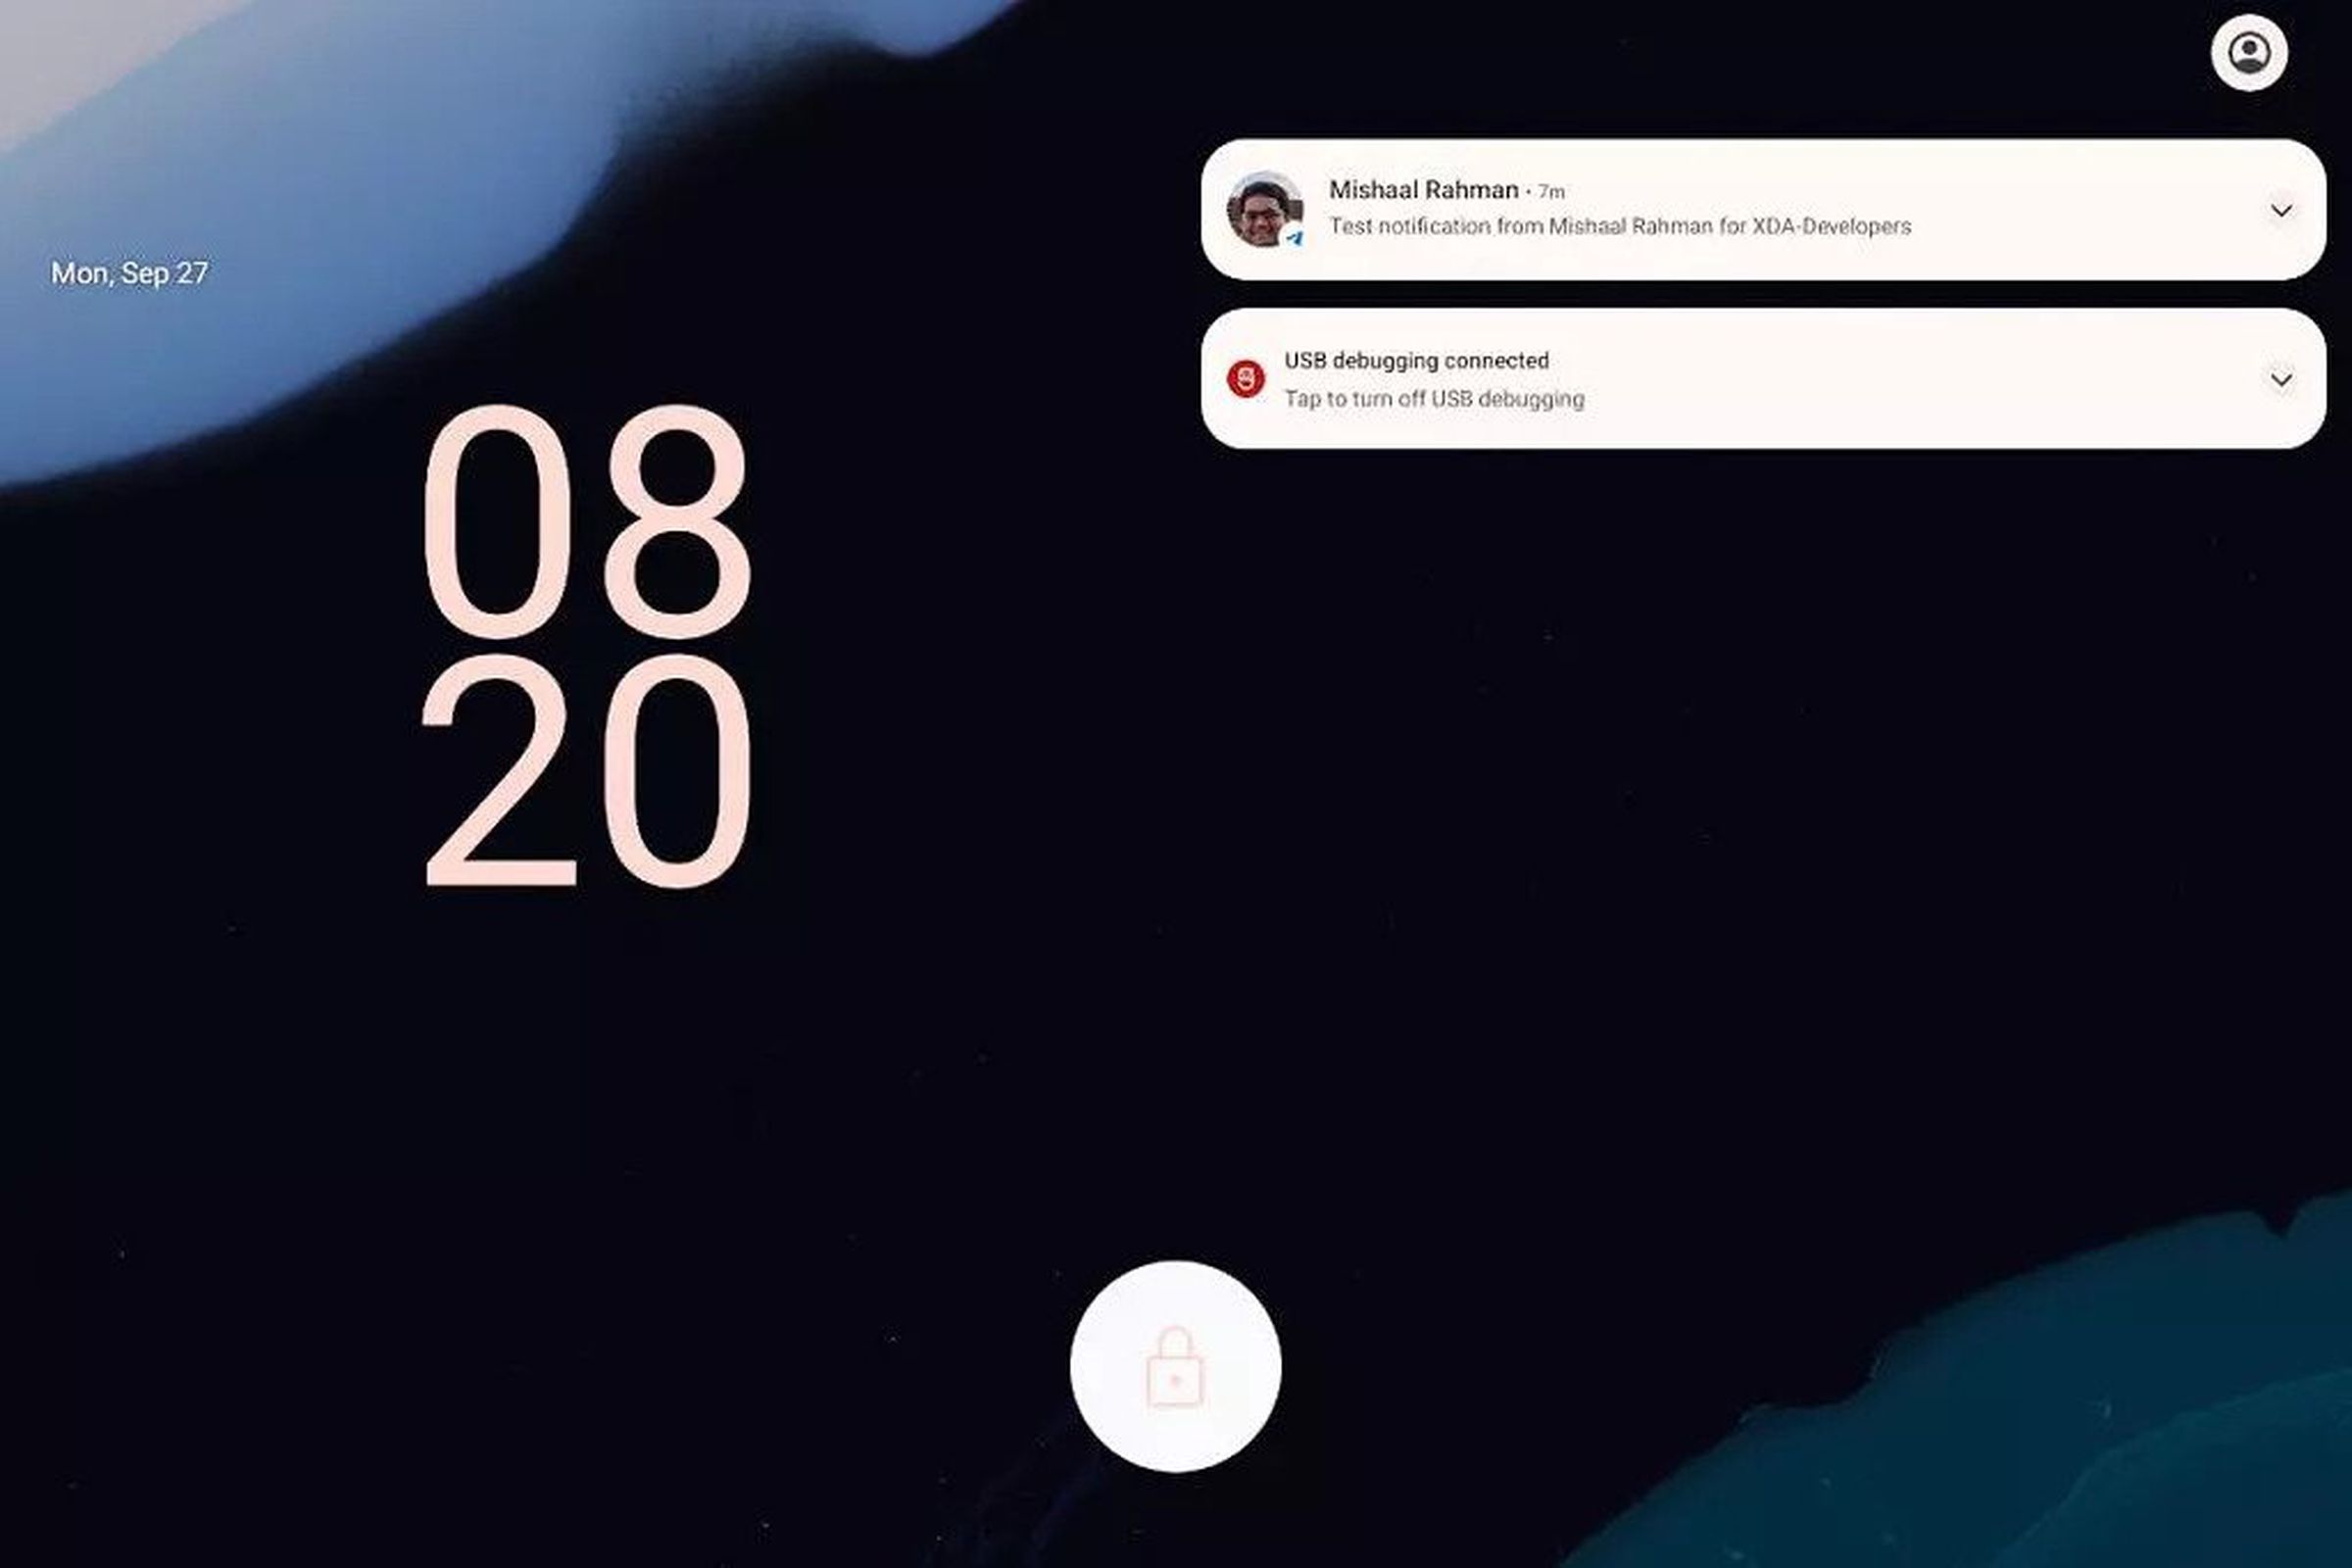 A redesigned lock screen could make better use of horizontal space.